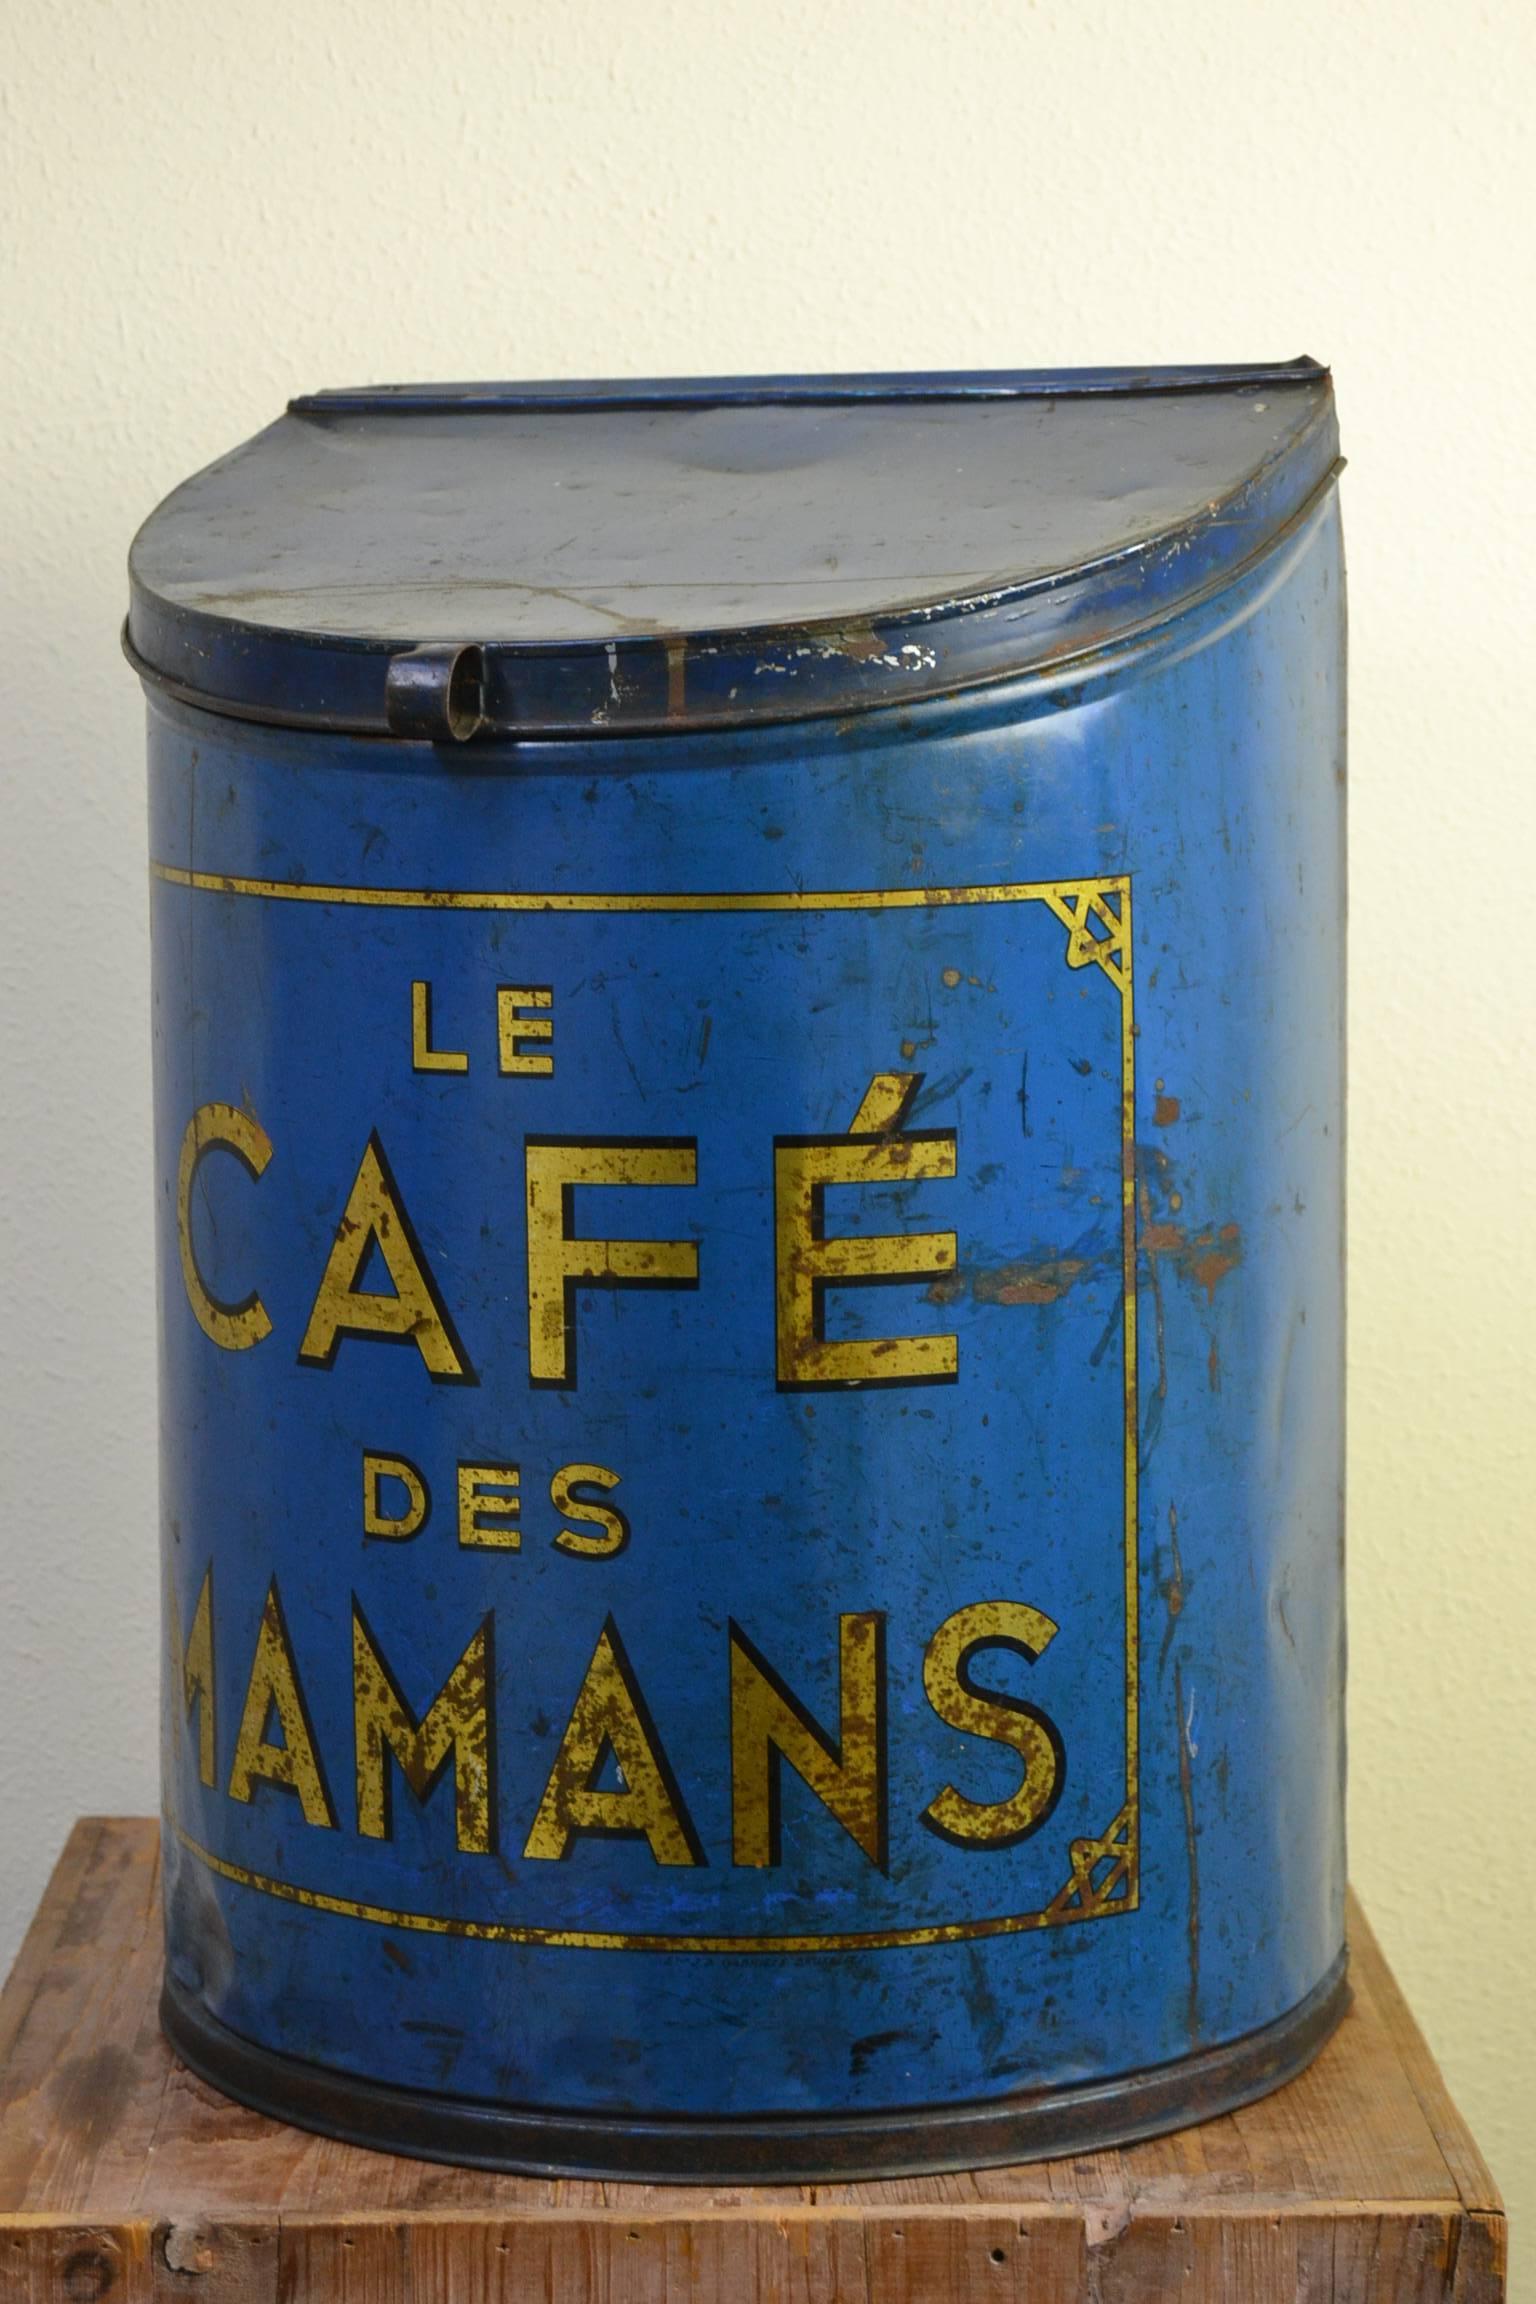 Exceptional rare big tin coffee box, coffee bin, coffee container, decorative box. Exceptional for his color; blue with lithograph gold inscription; as they are mostly red and special because of the text: Le café des mamans or moms coffee, what